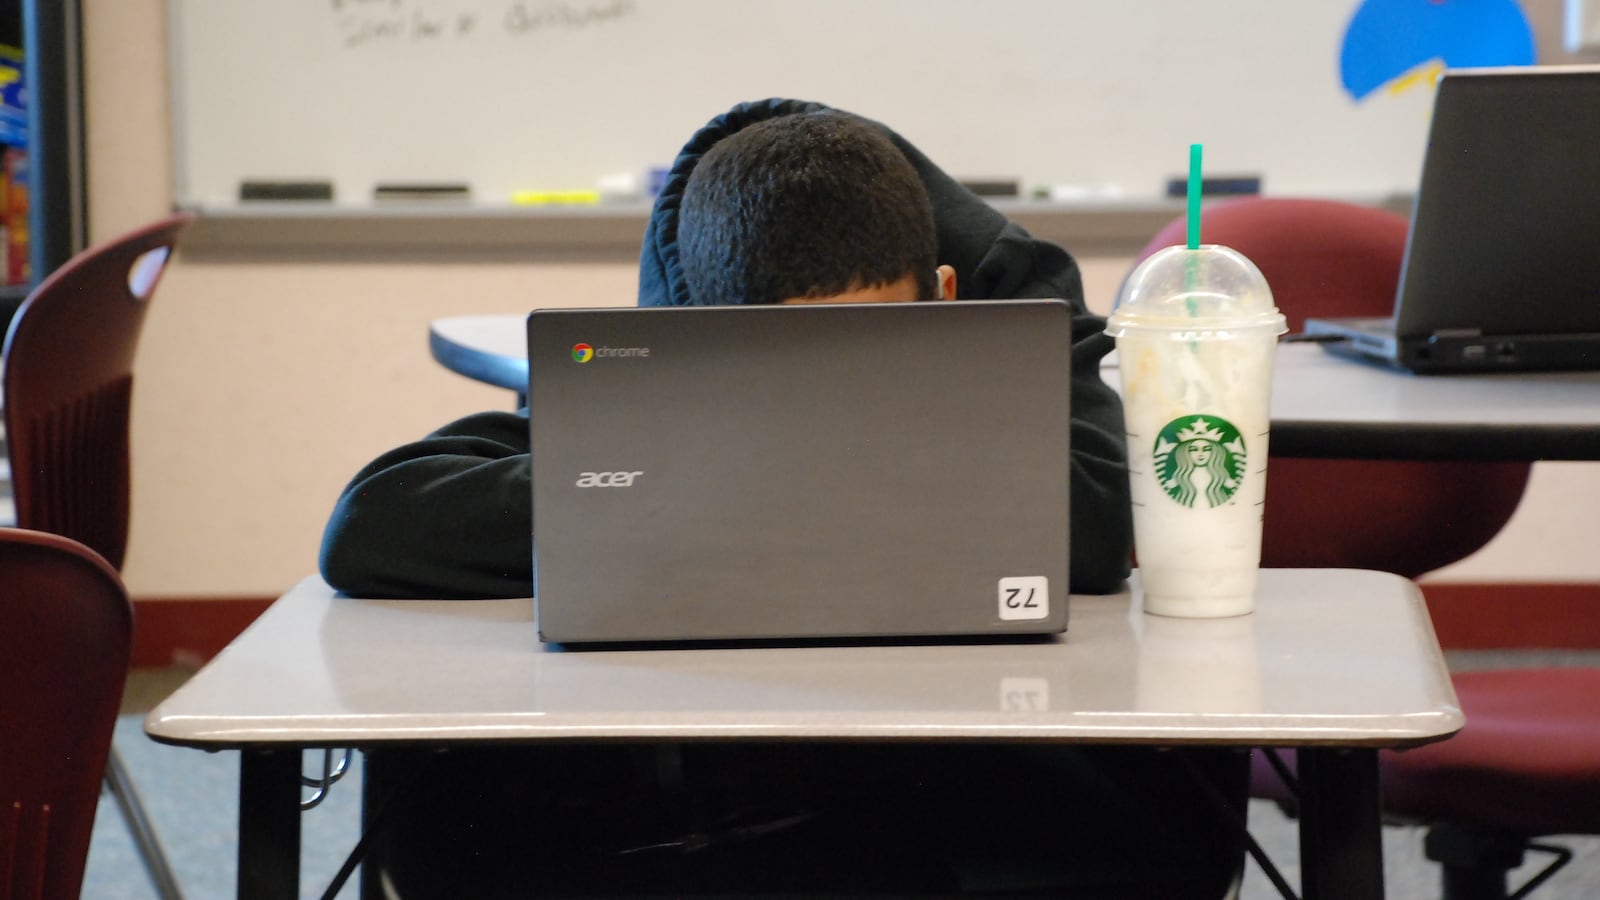 PARCC tests, which most students took online, are supposed to measure critical thinking and problem solving.